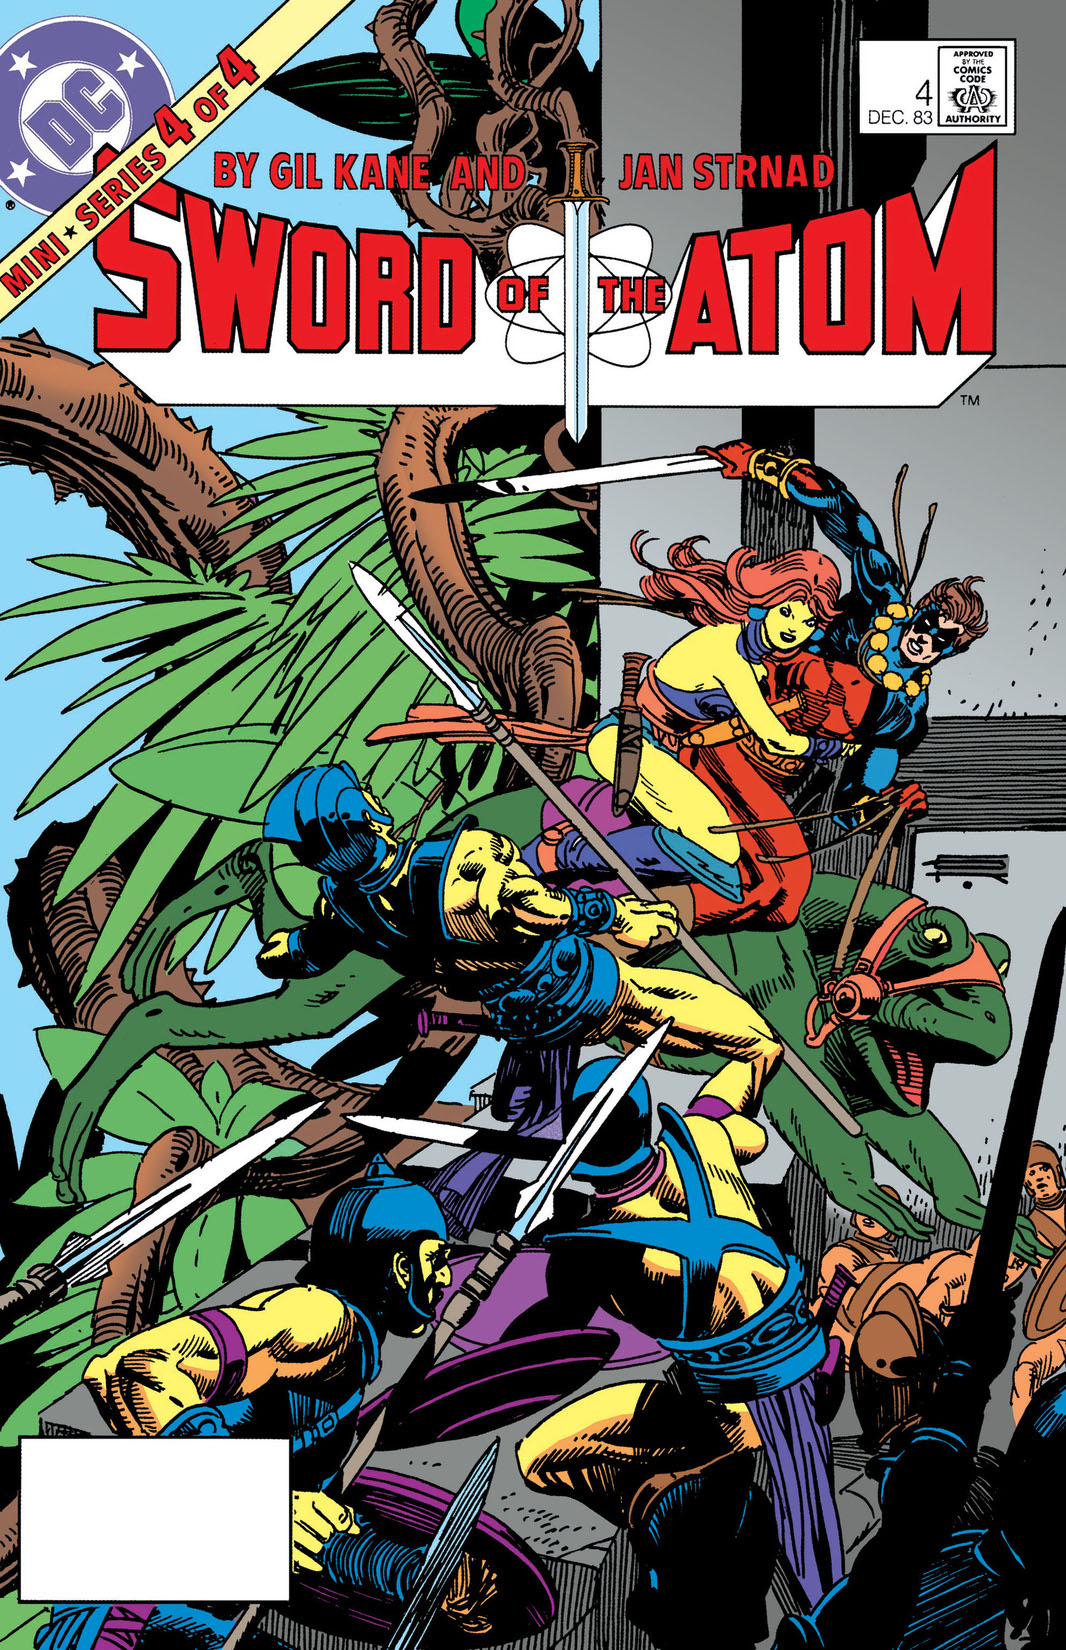 Sword of the Atom #4 preview images